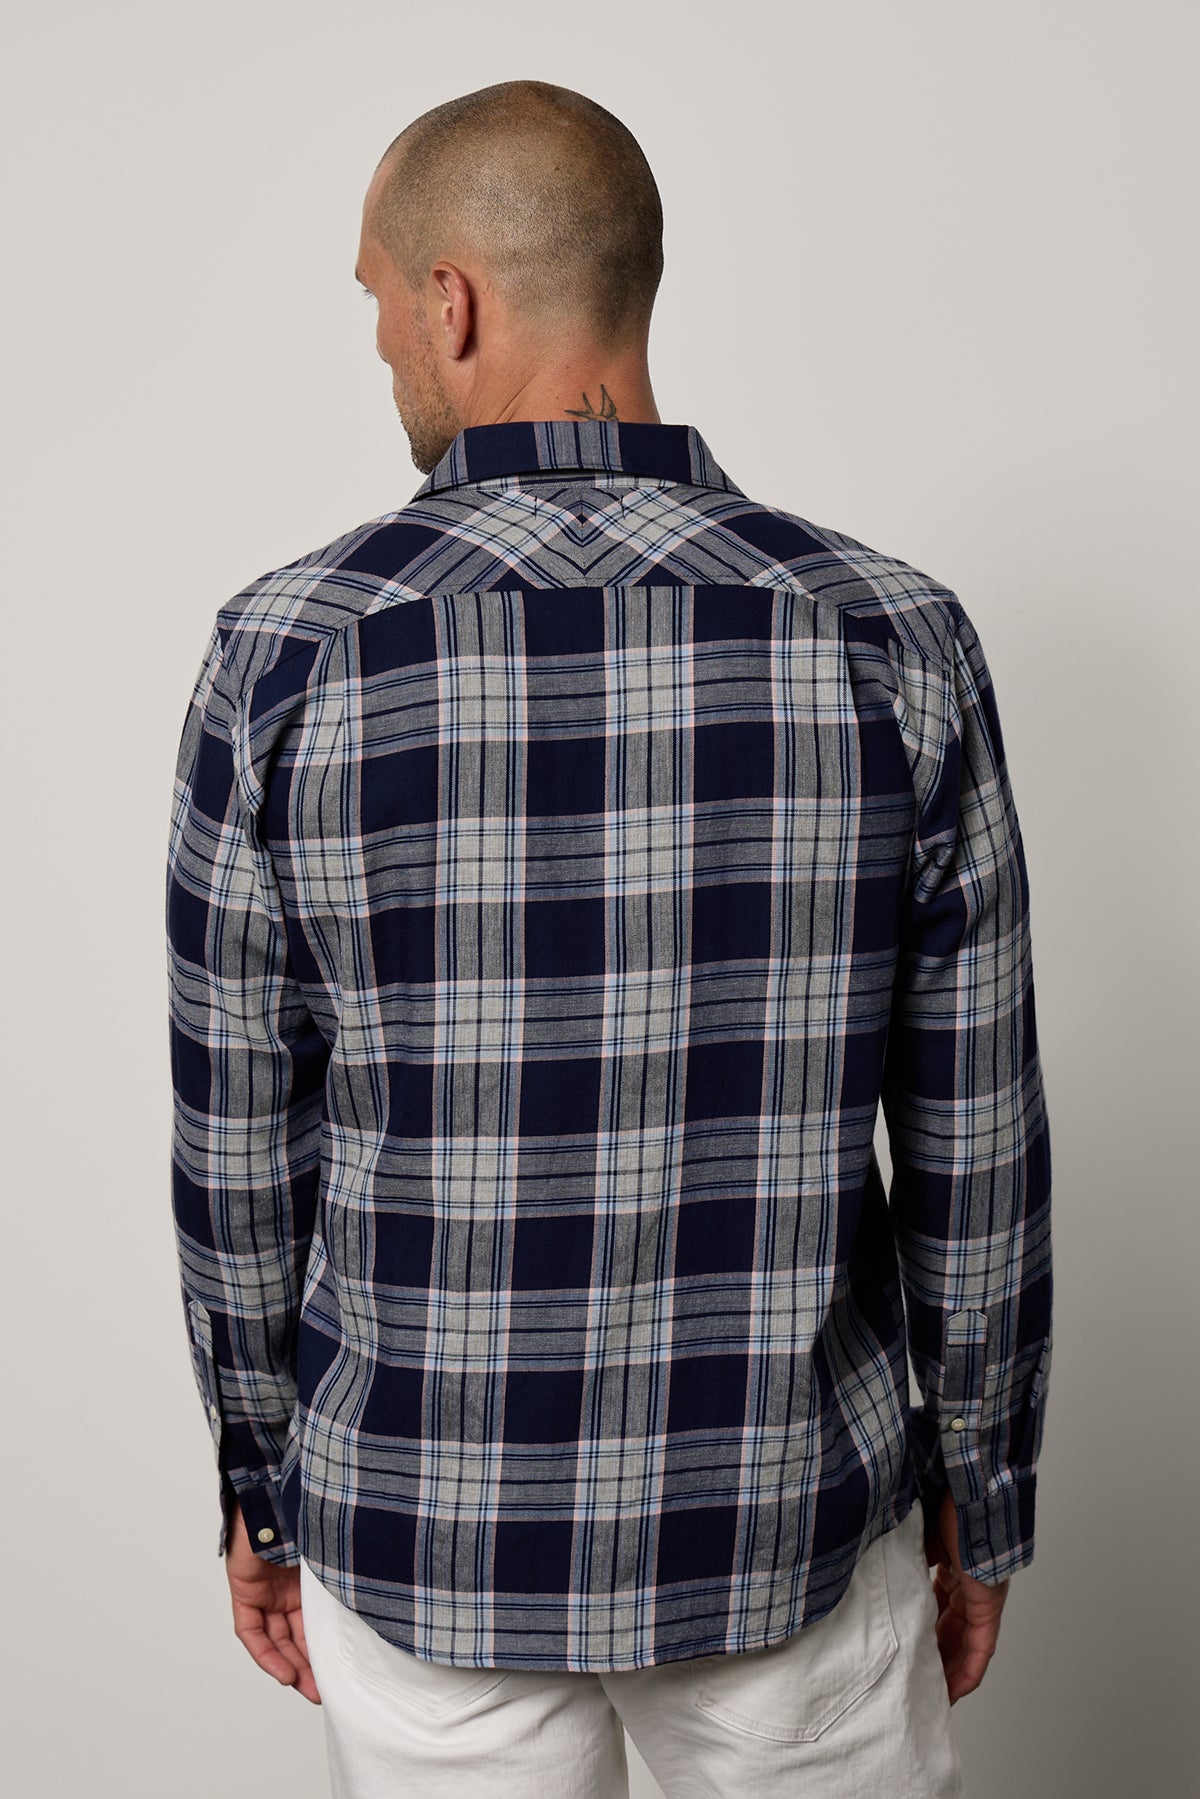 the back view of a man wearing a Velvet by Graham & Spencer LEONARD PLAID BUTTON-UP SHIRT.-26079100469441